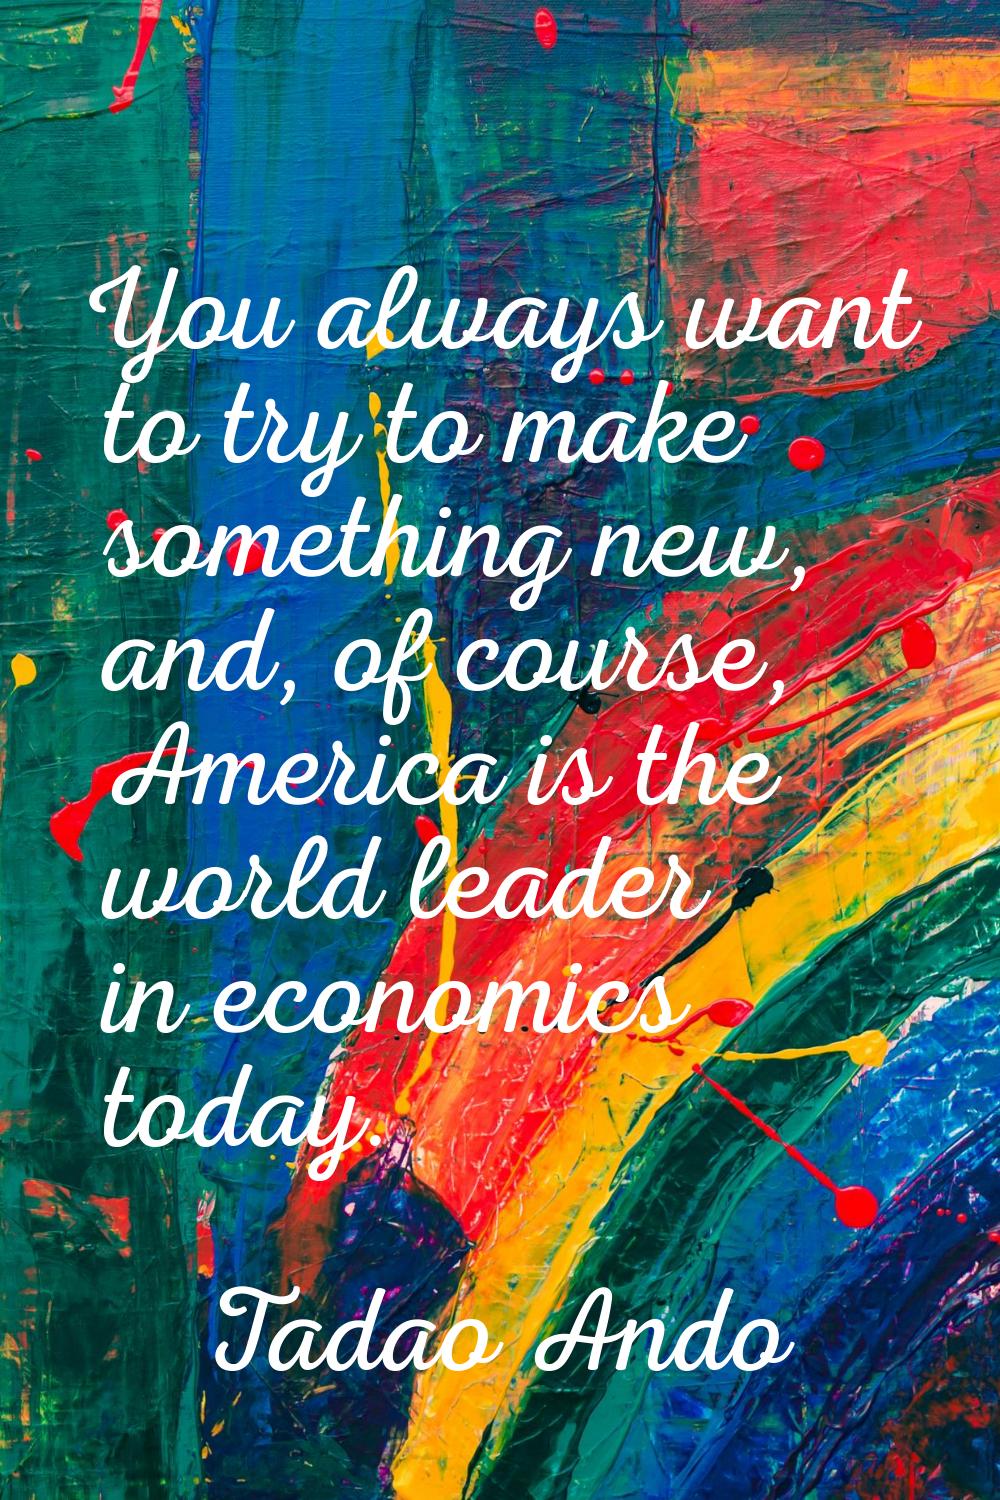 You always want to try to make something new, and, of course, America is the world leader in econom